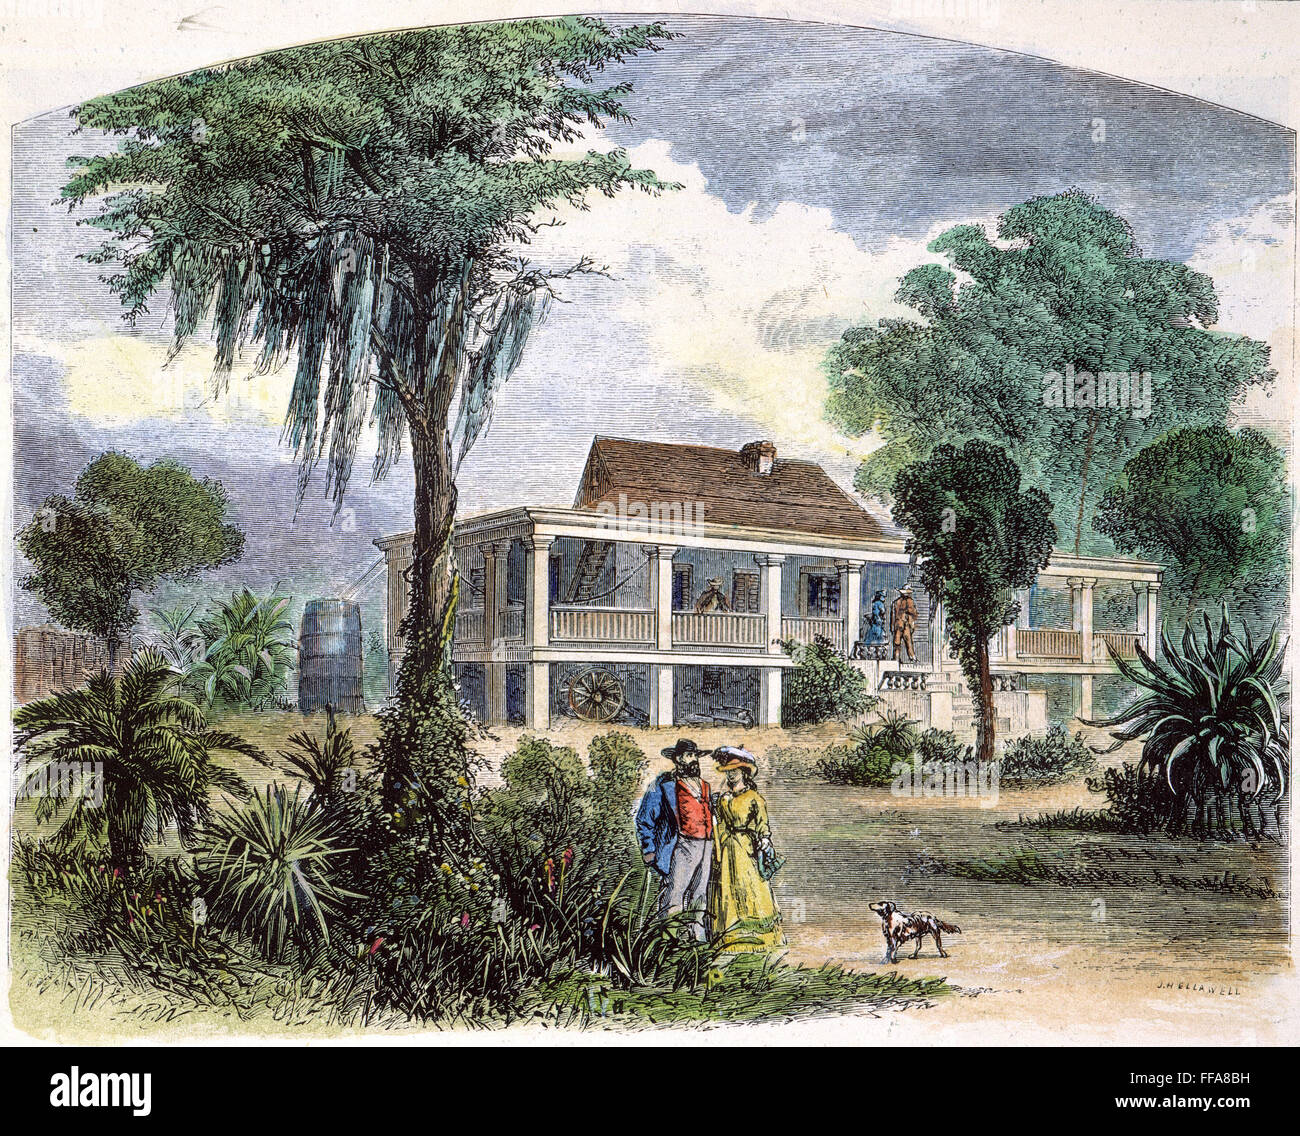 SOUTHERN PLANTATION 19th C. /nA plantation in the American South: engraving, mid-19th century. Stock Photo